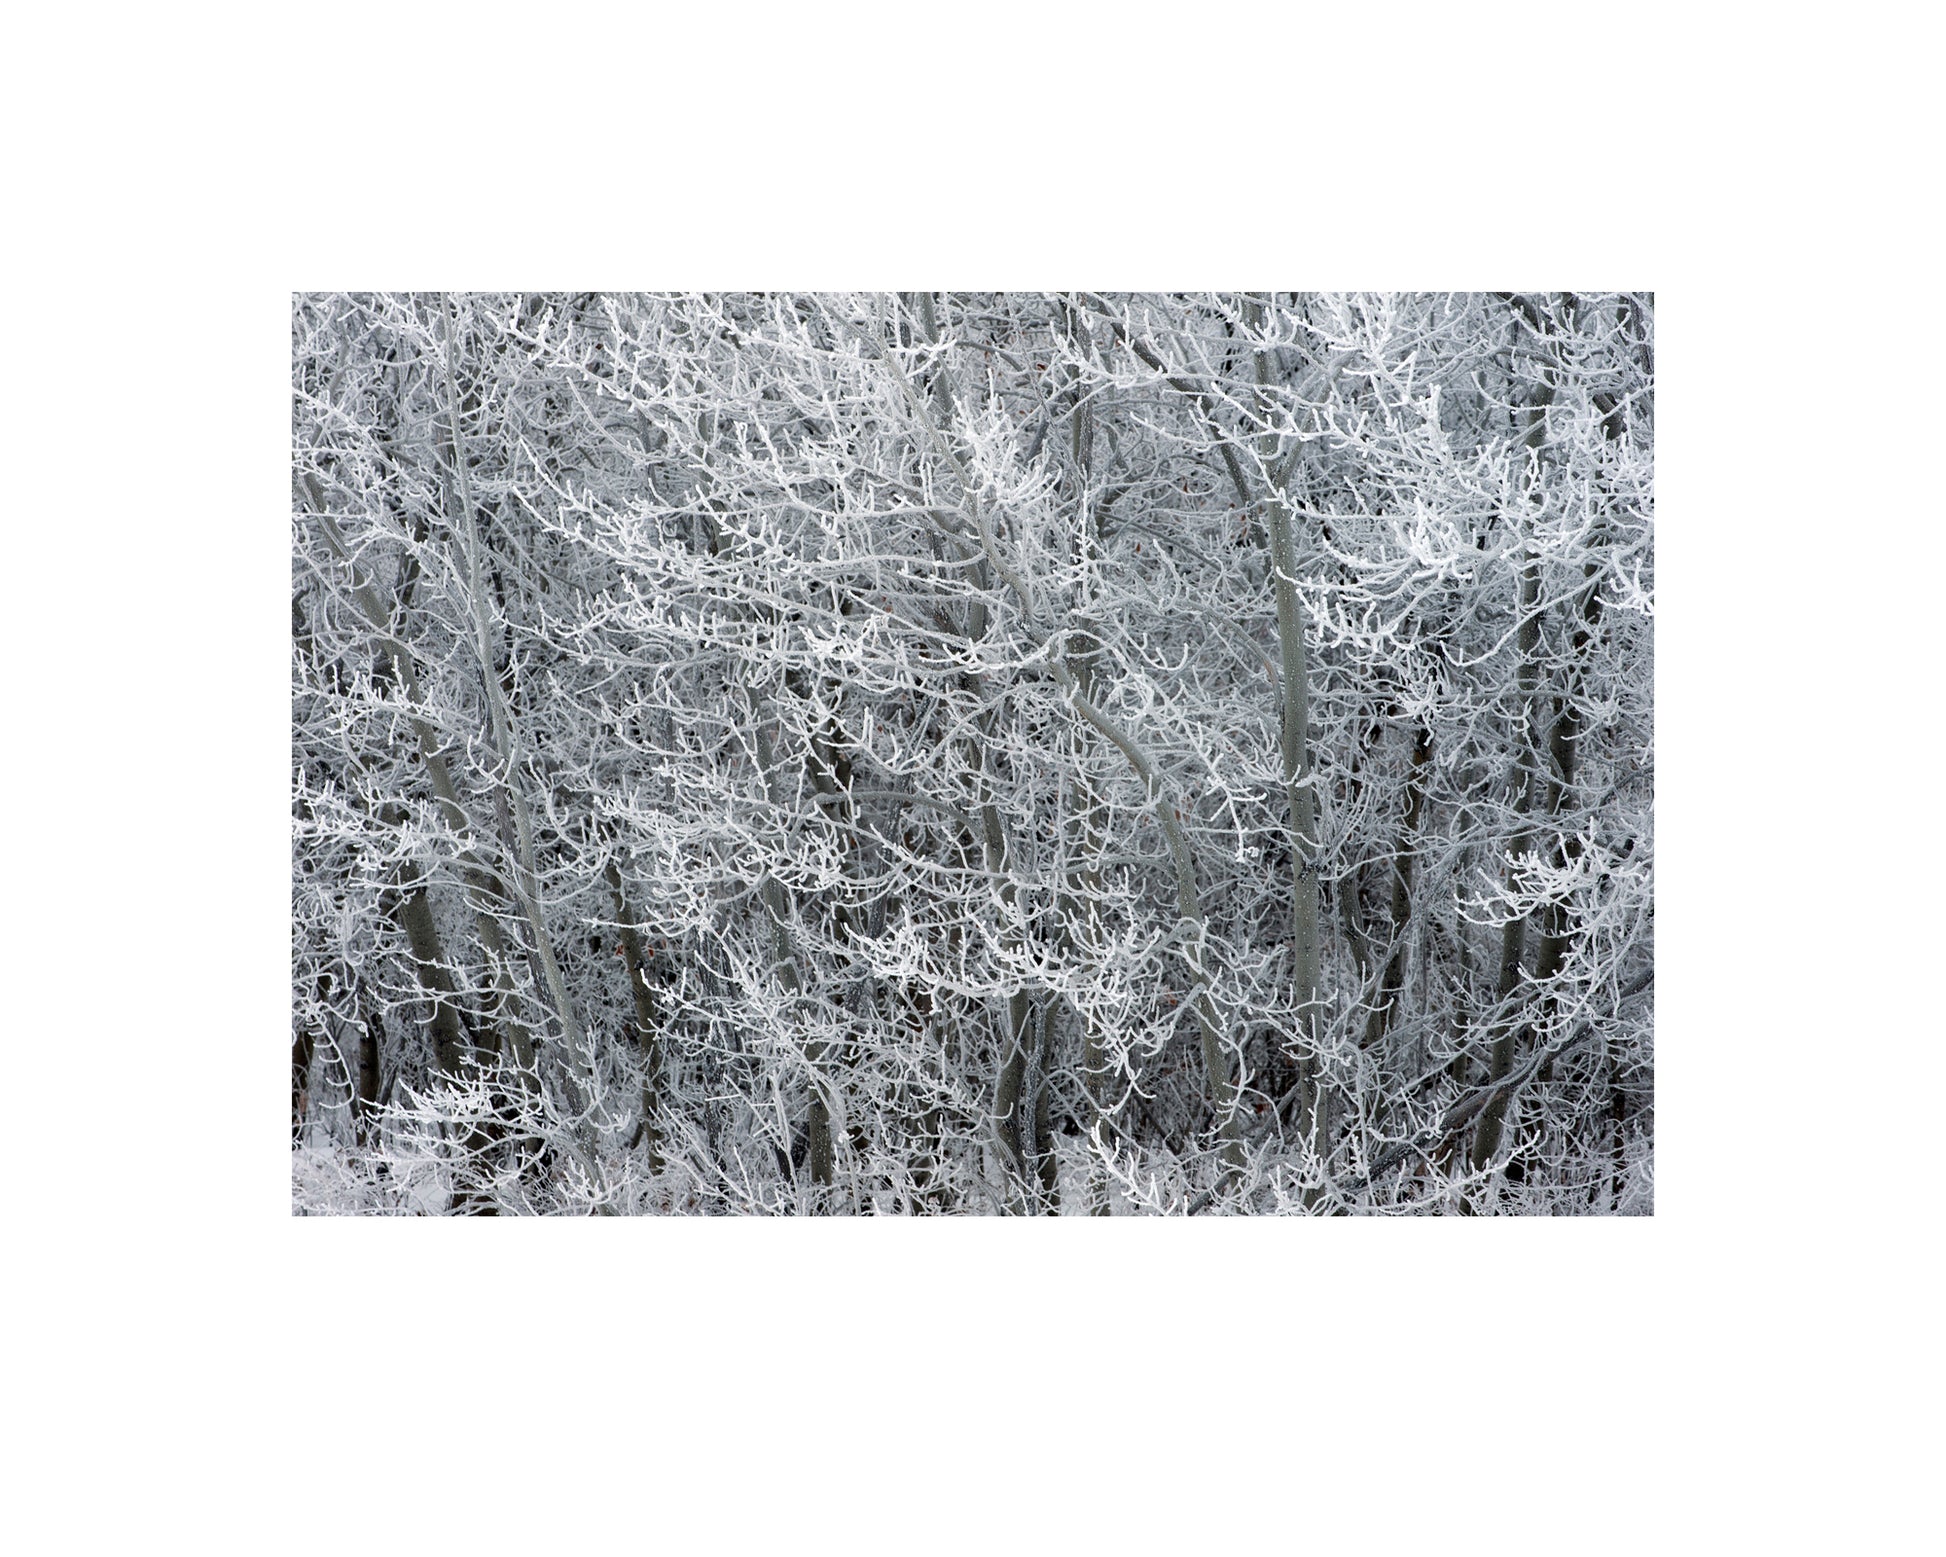 Photograph of frosty trees